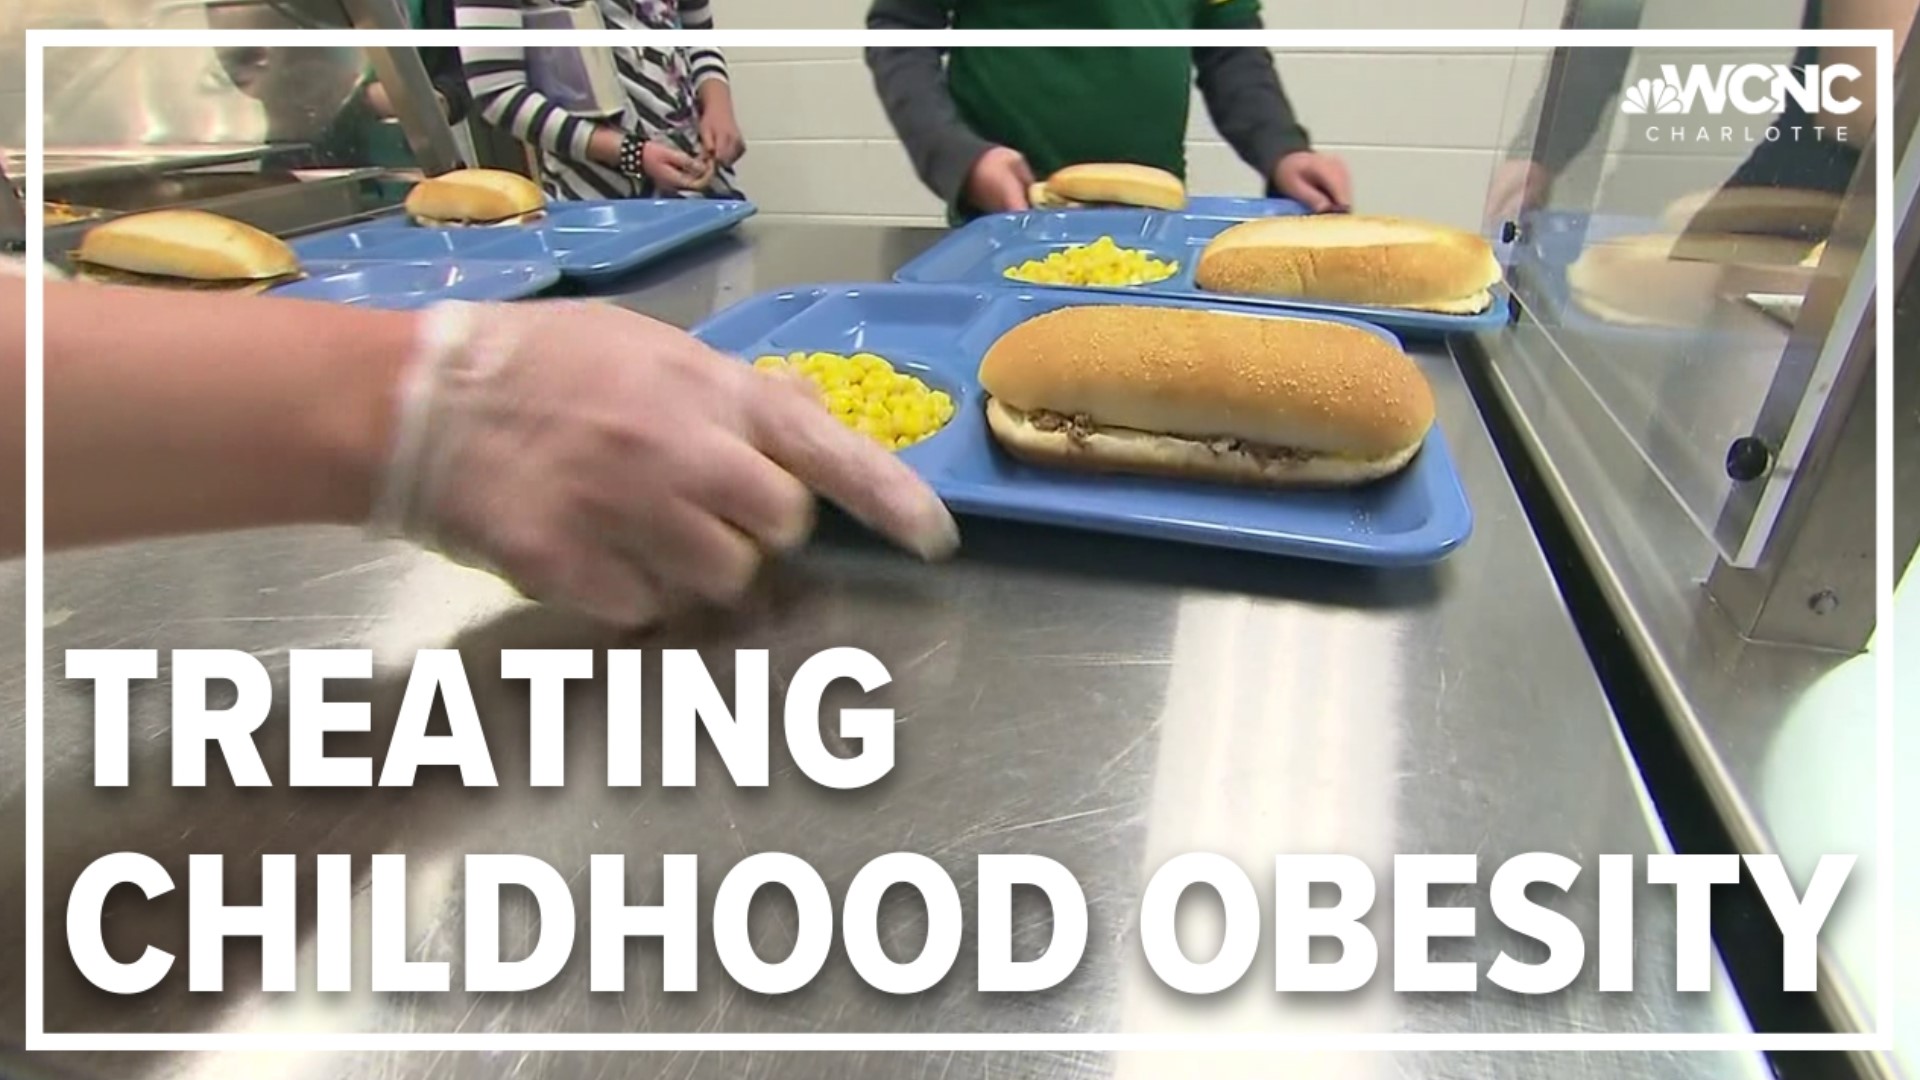 The American Academy of Pediatrics has guidelines on treating childhood obesity.